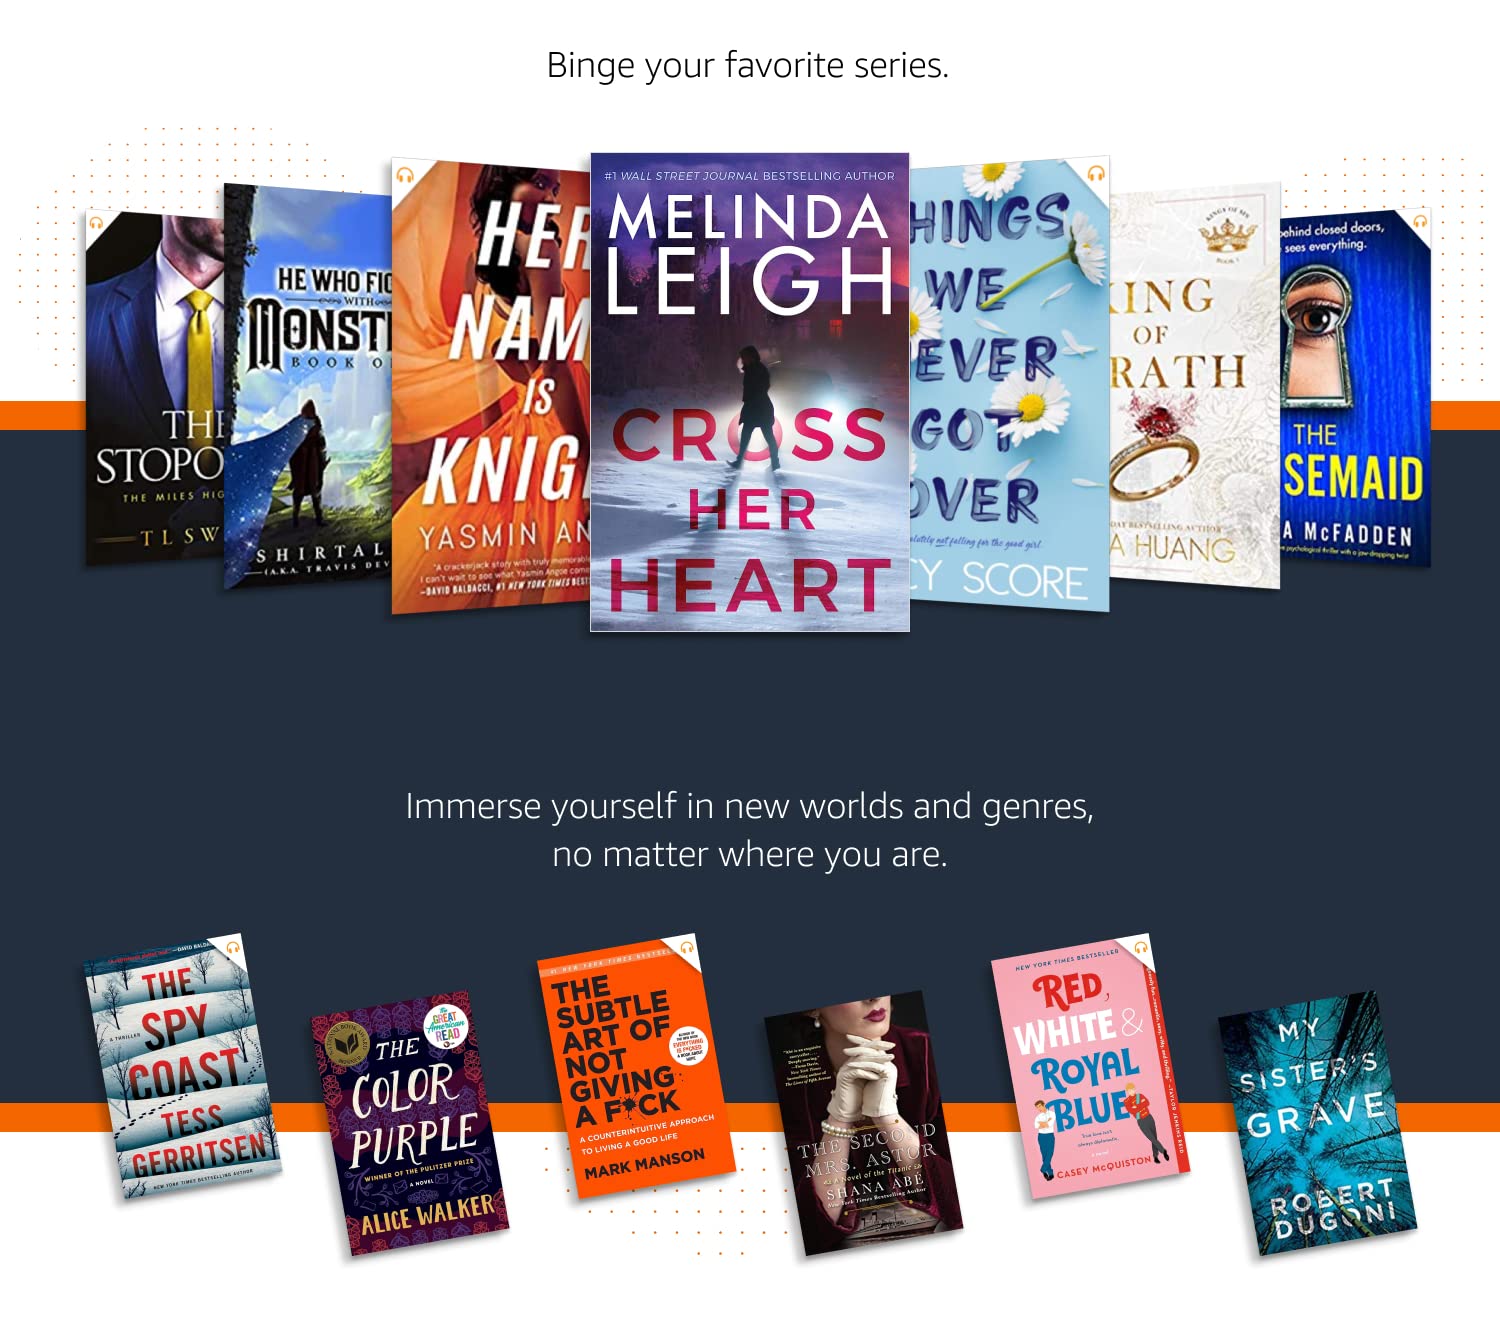 With Kindle Unlimited, you can binge-read your favorite series or immerse yourself in new worlds and genres.